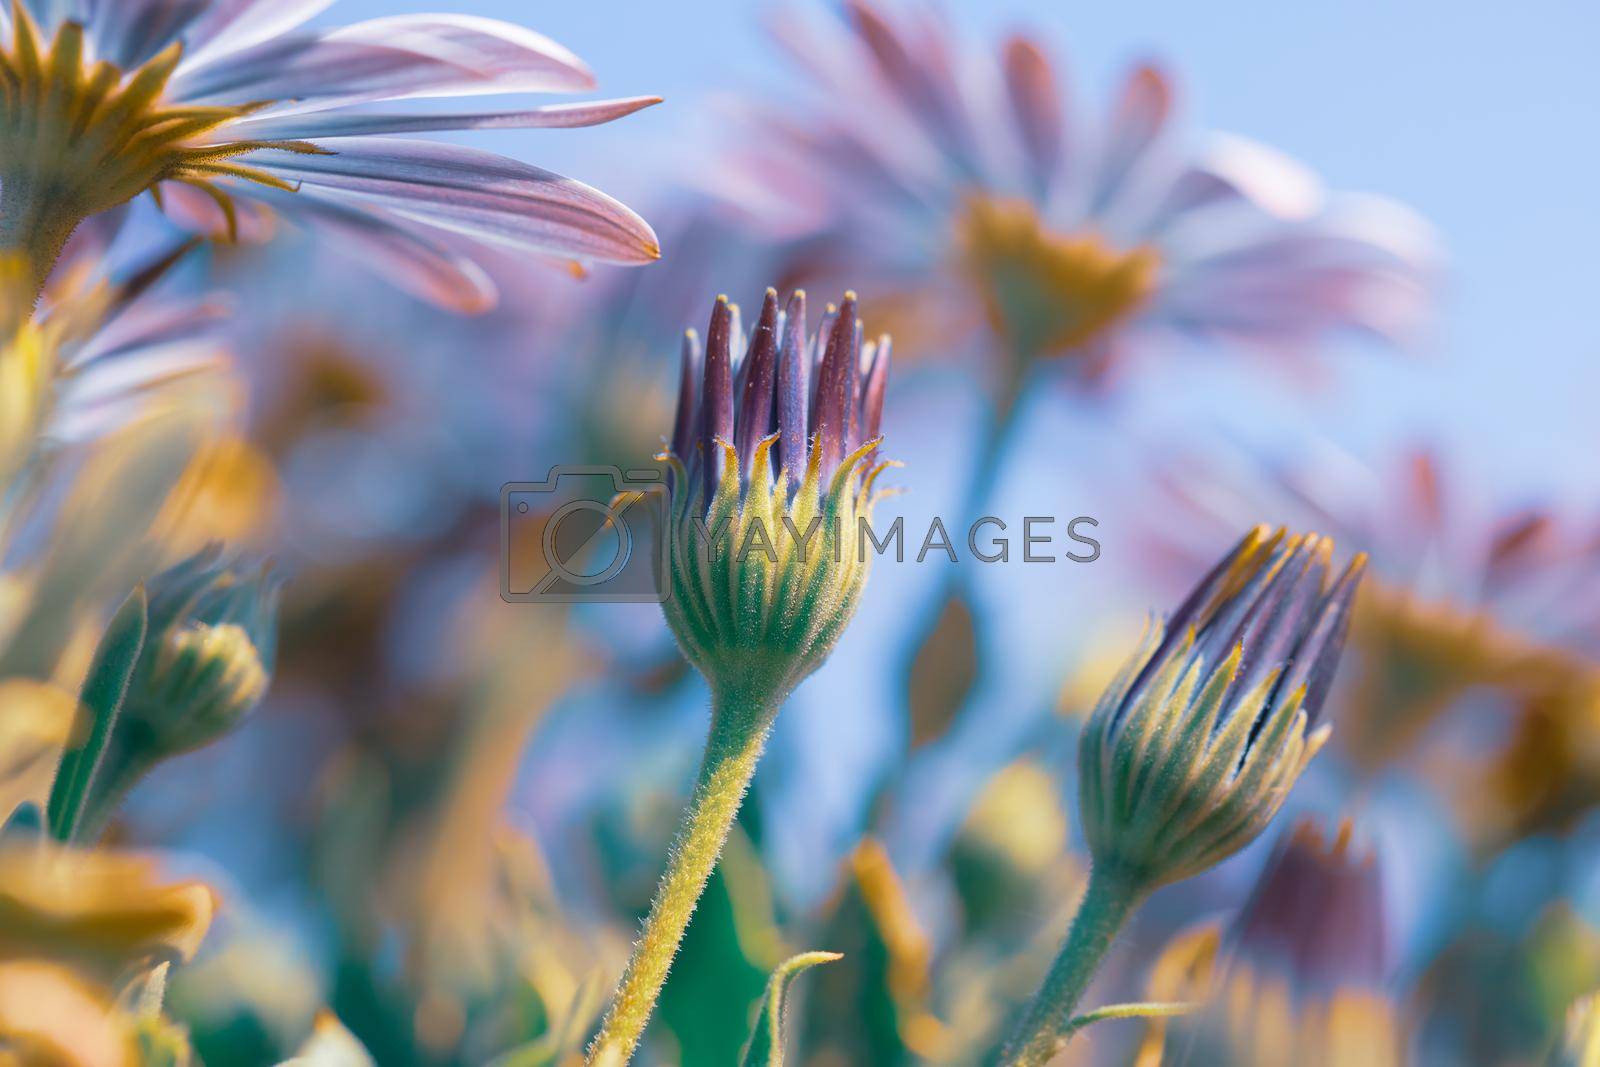 Royalty free image of Beautiful Daisy Flower Field by Anna_Omelchenko